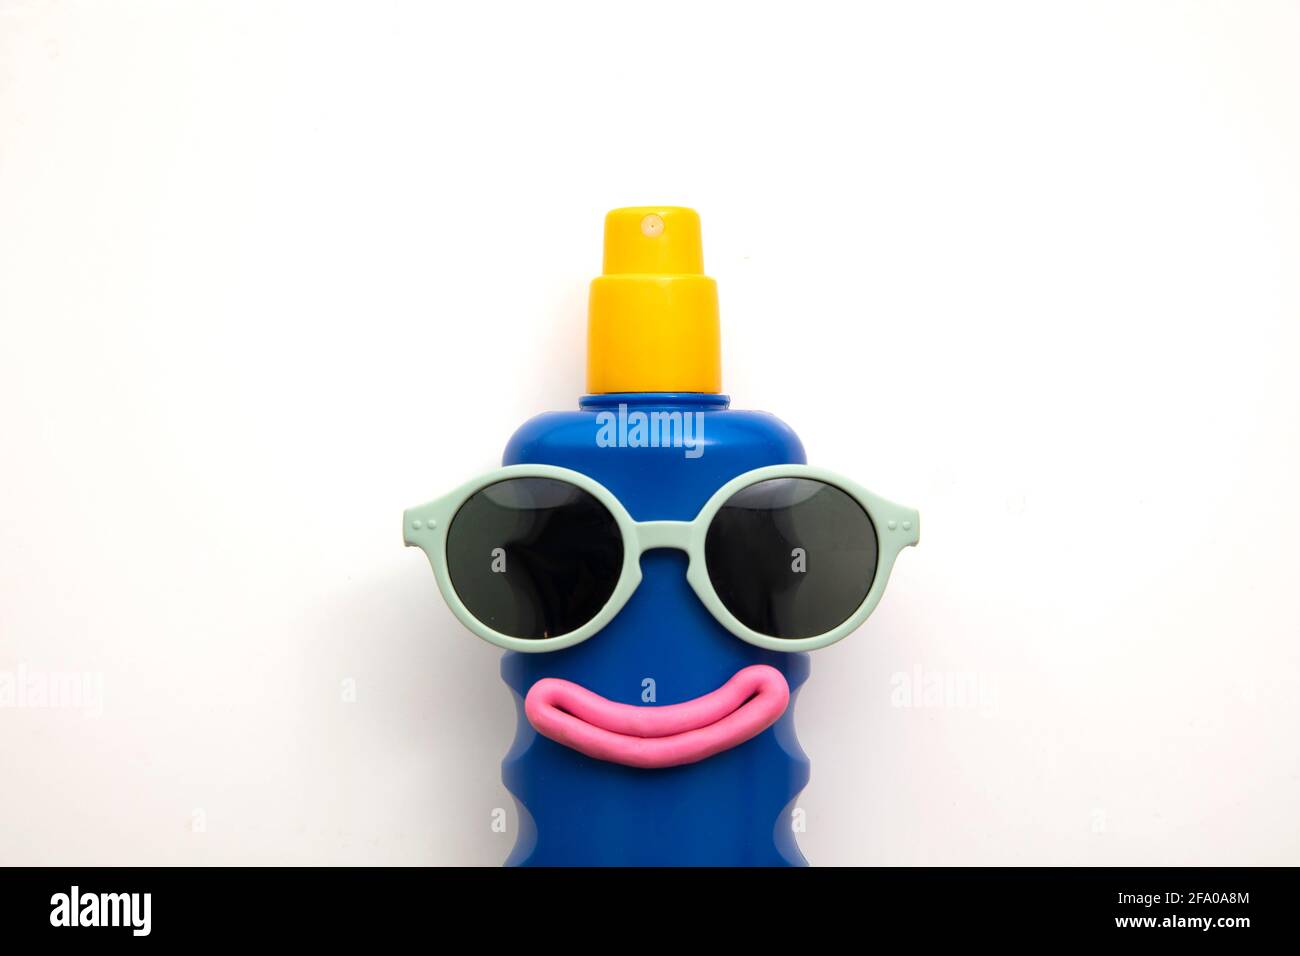 Suncream lotion bottle with a happy face and sunglasses Stock Photo